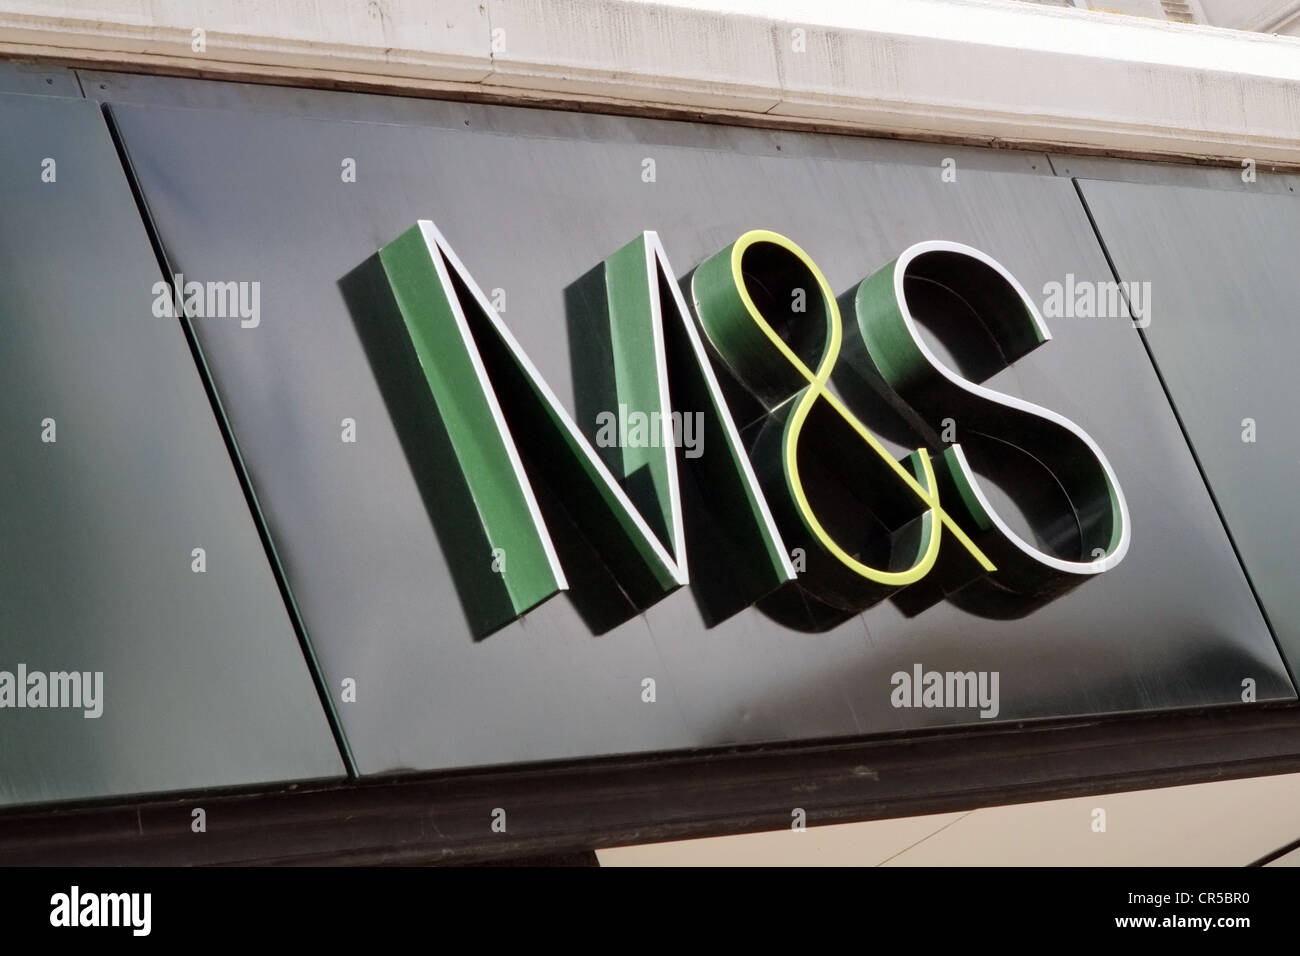 M&S sign outside a retail outlet Stock Photo